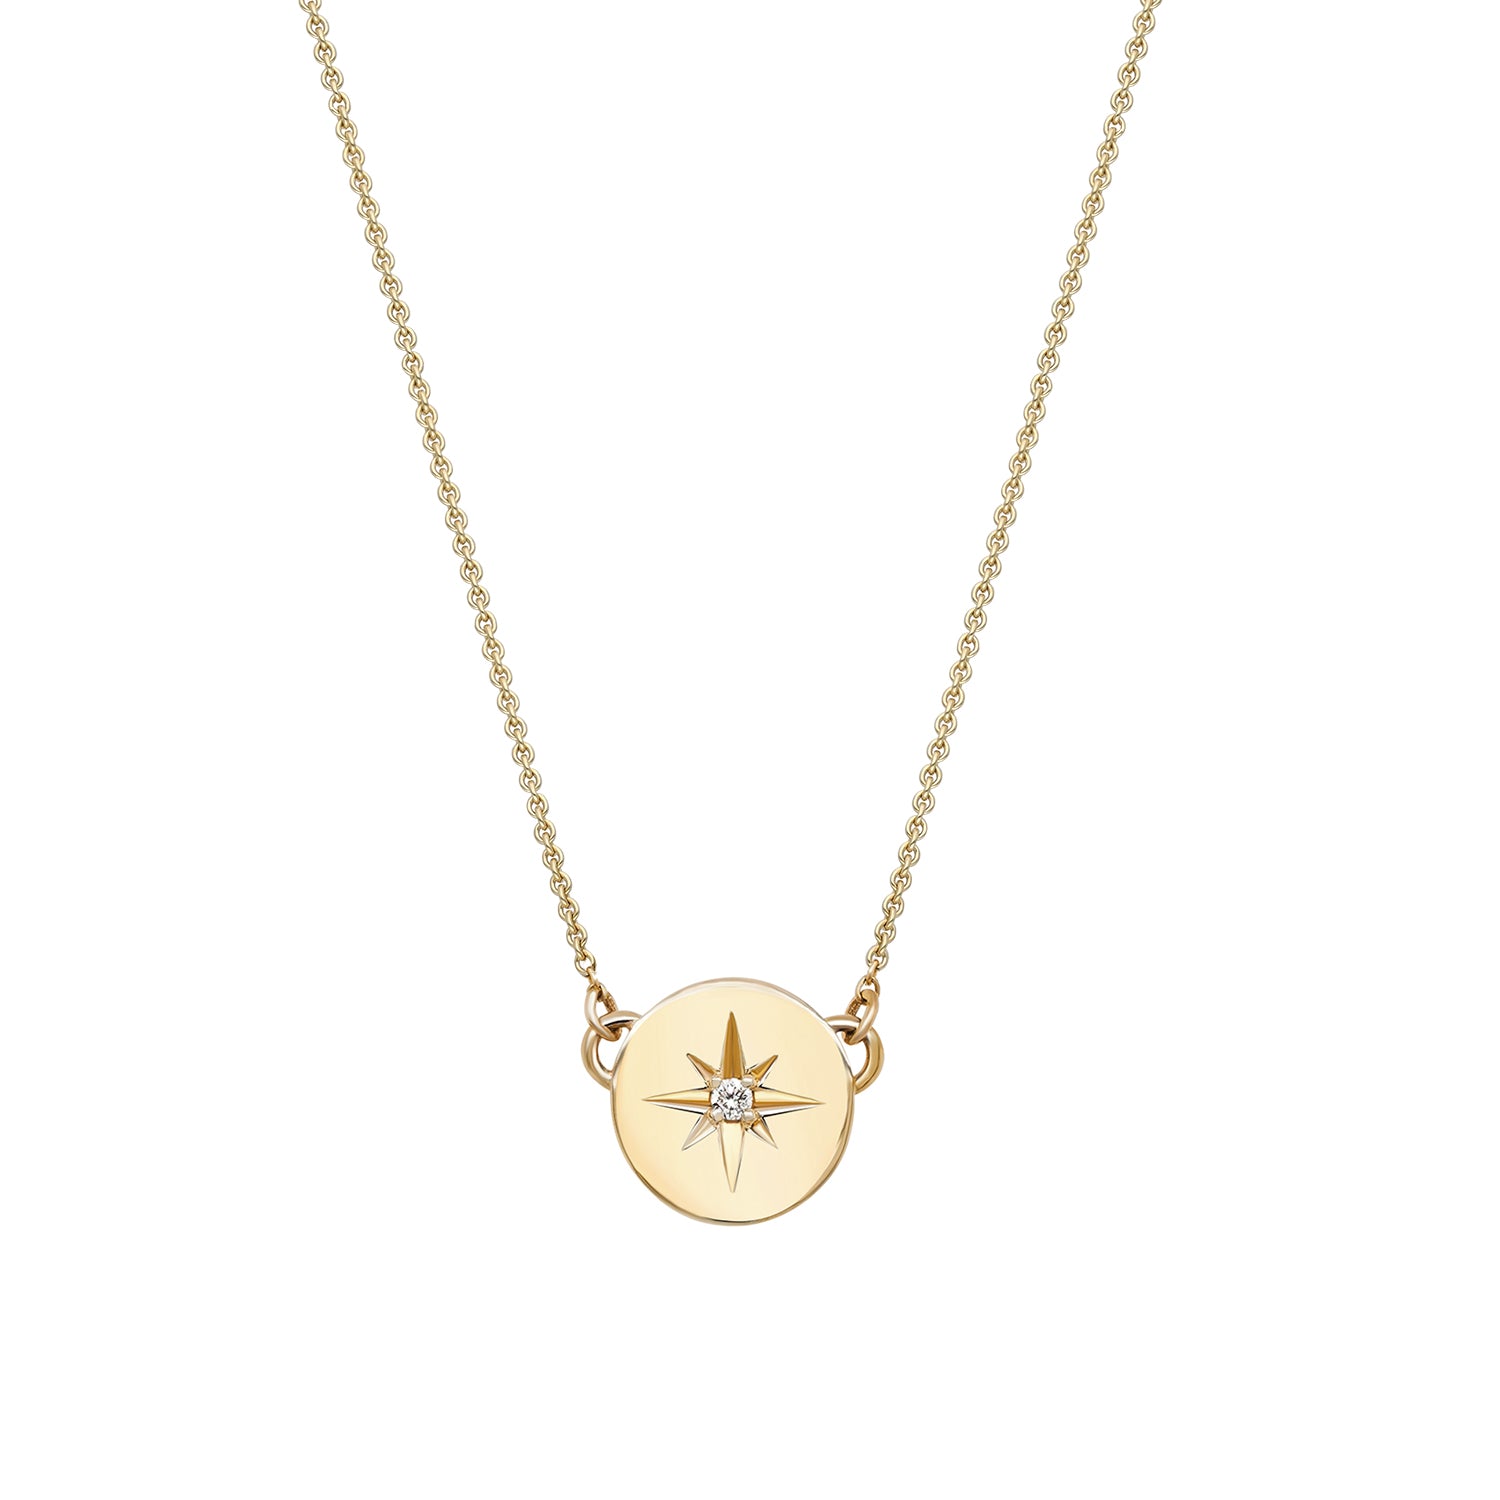 Gold disc necklace follow your star